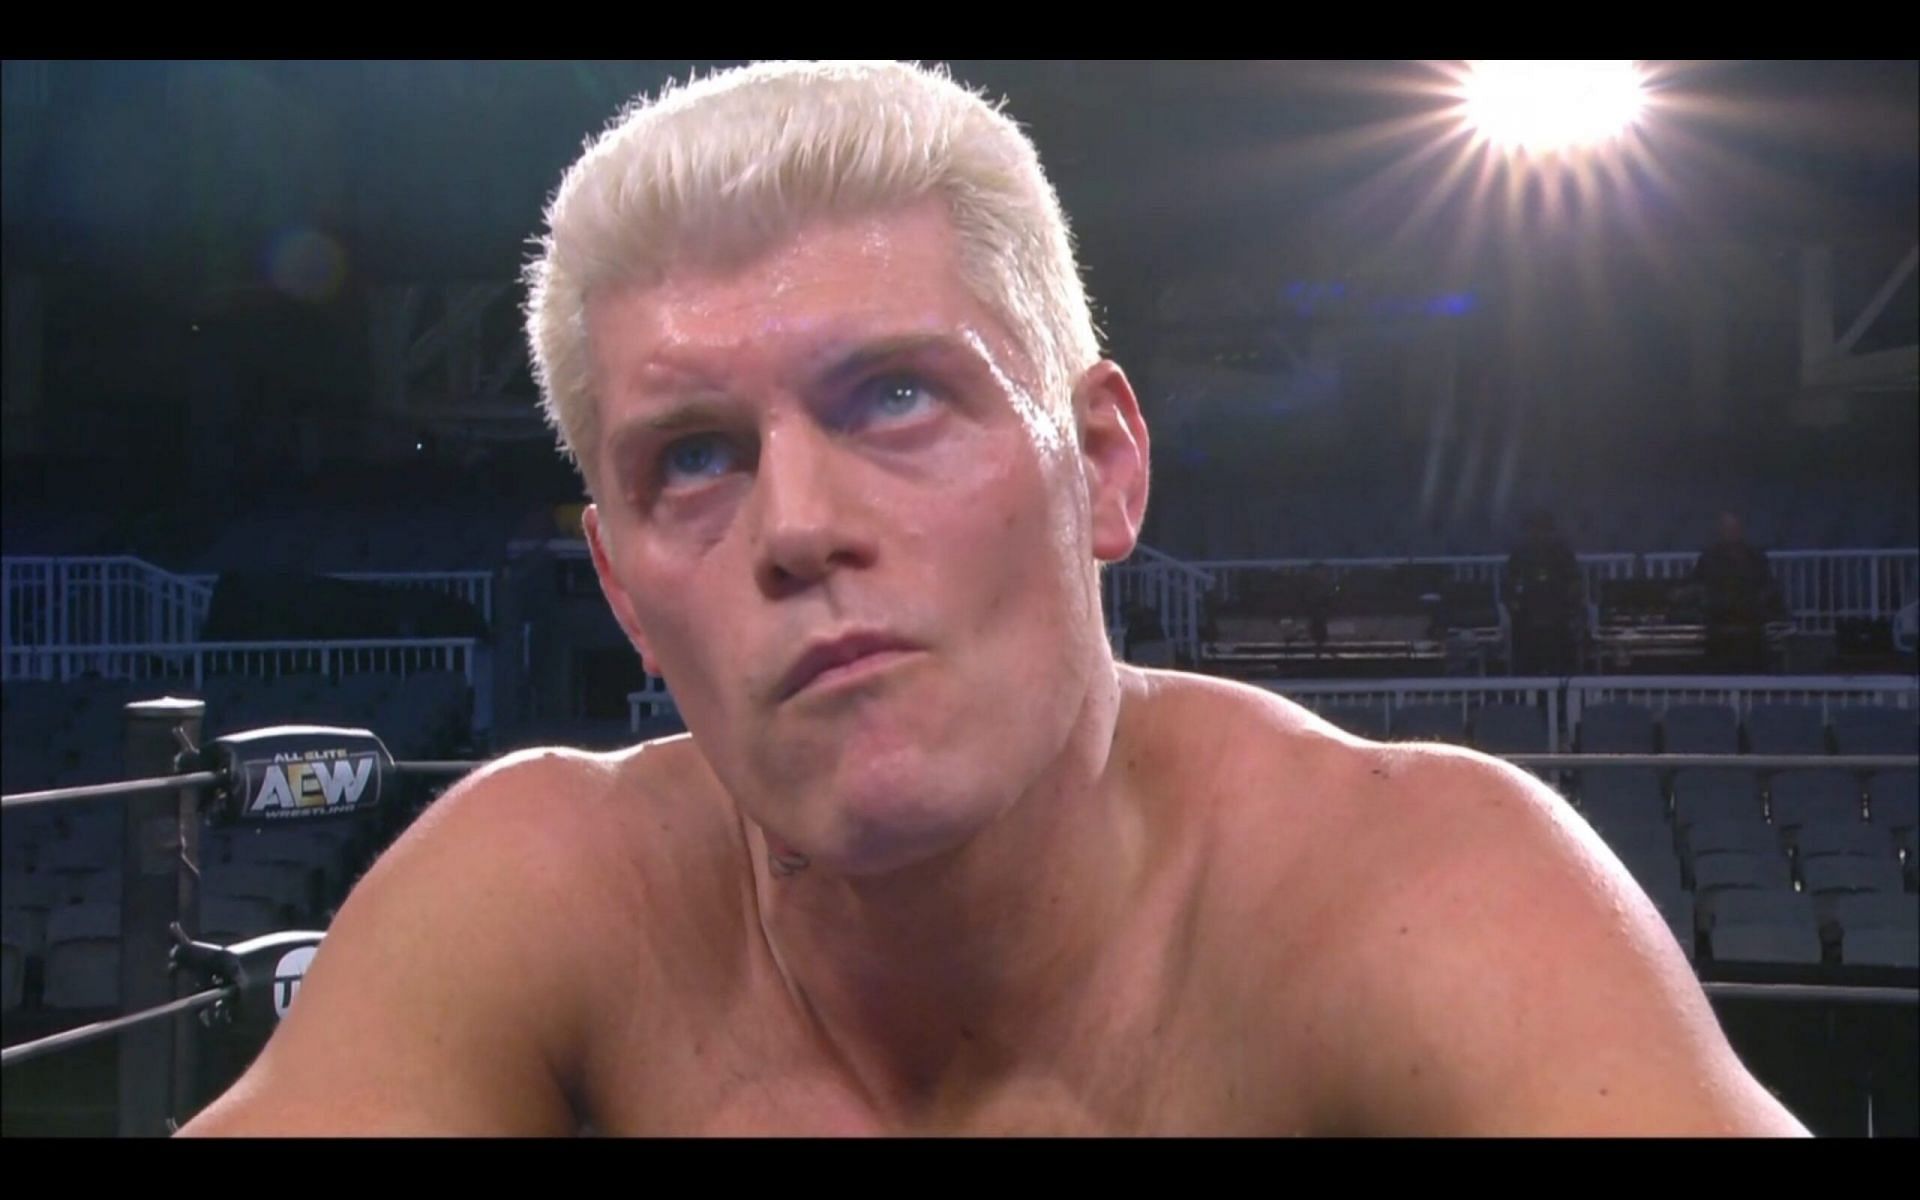 Cody Rhodes was an executive and in-ring performer in AEW